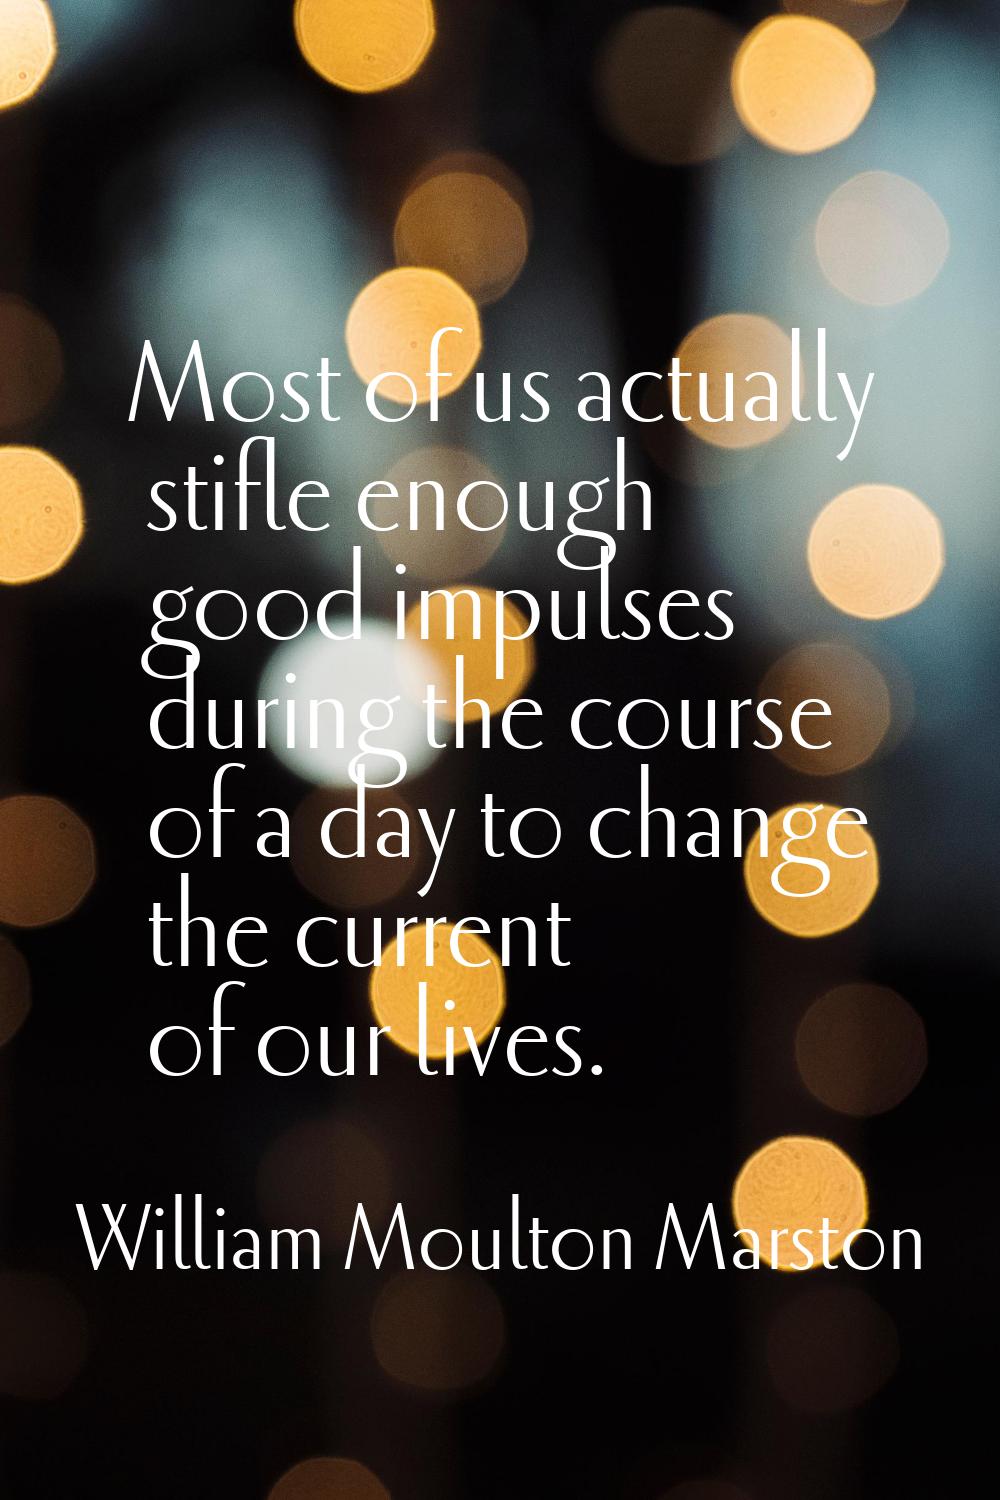 Most of us actually stifle enough good impulses during the course of a day to change the current of